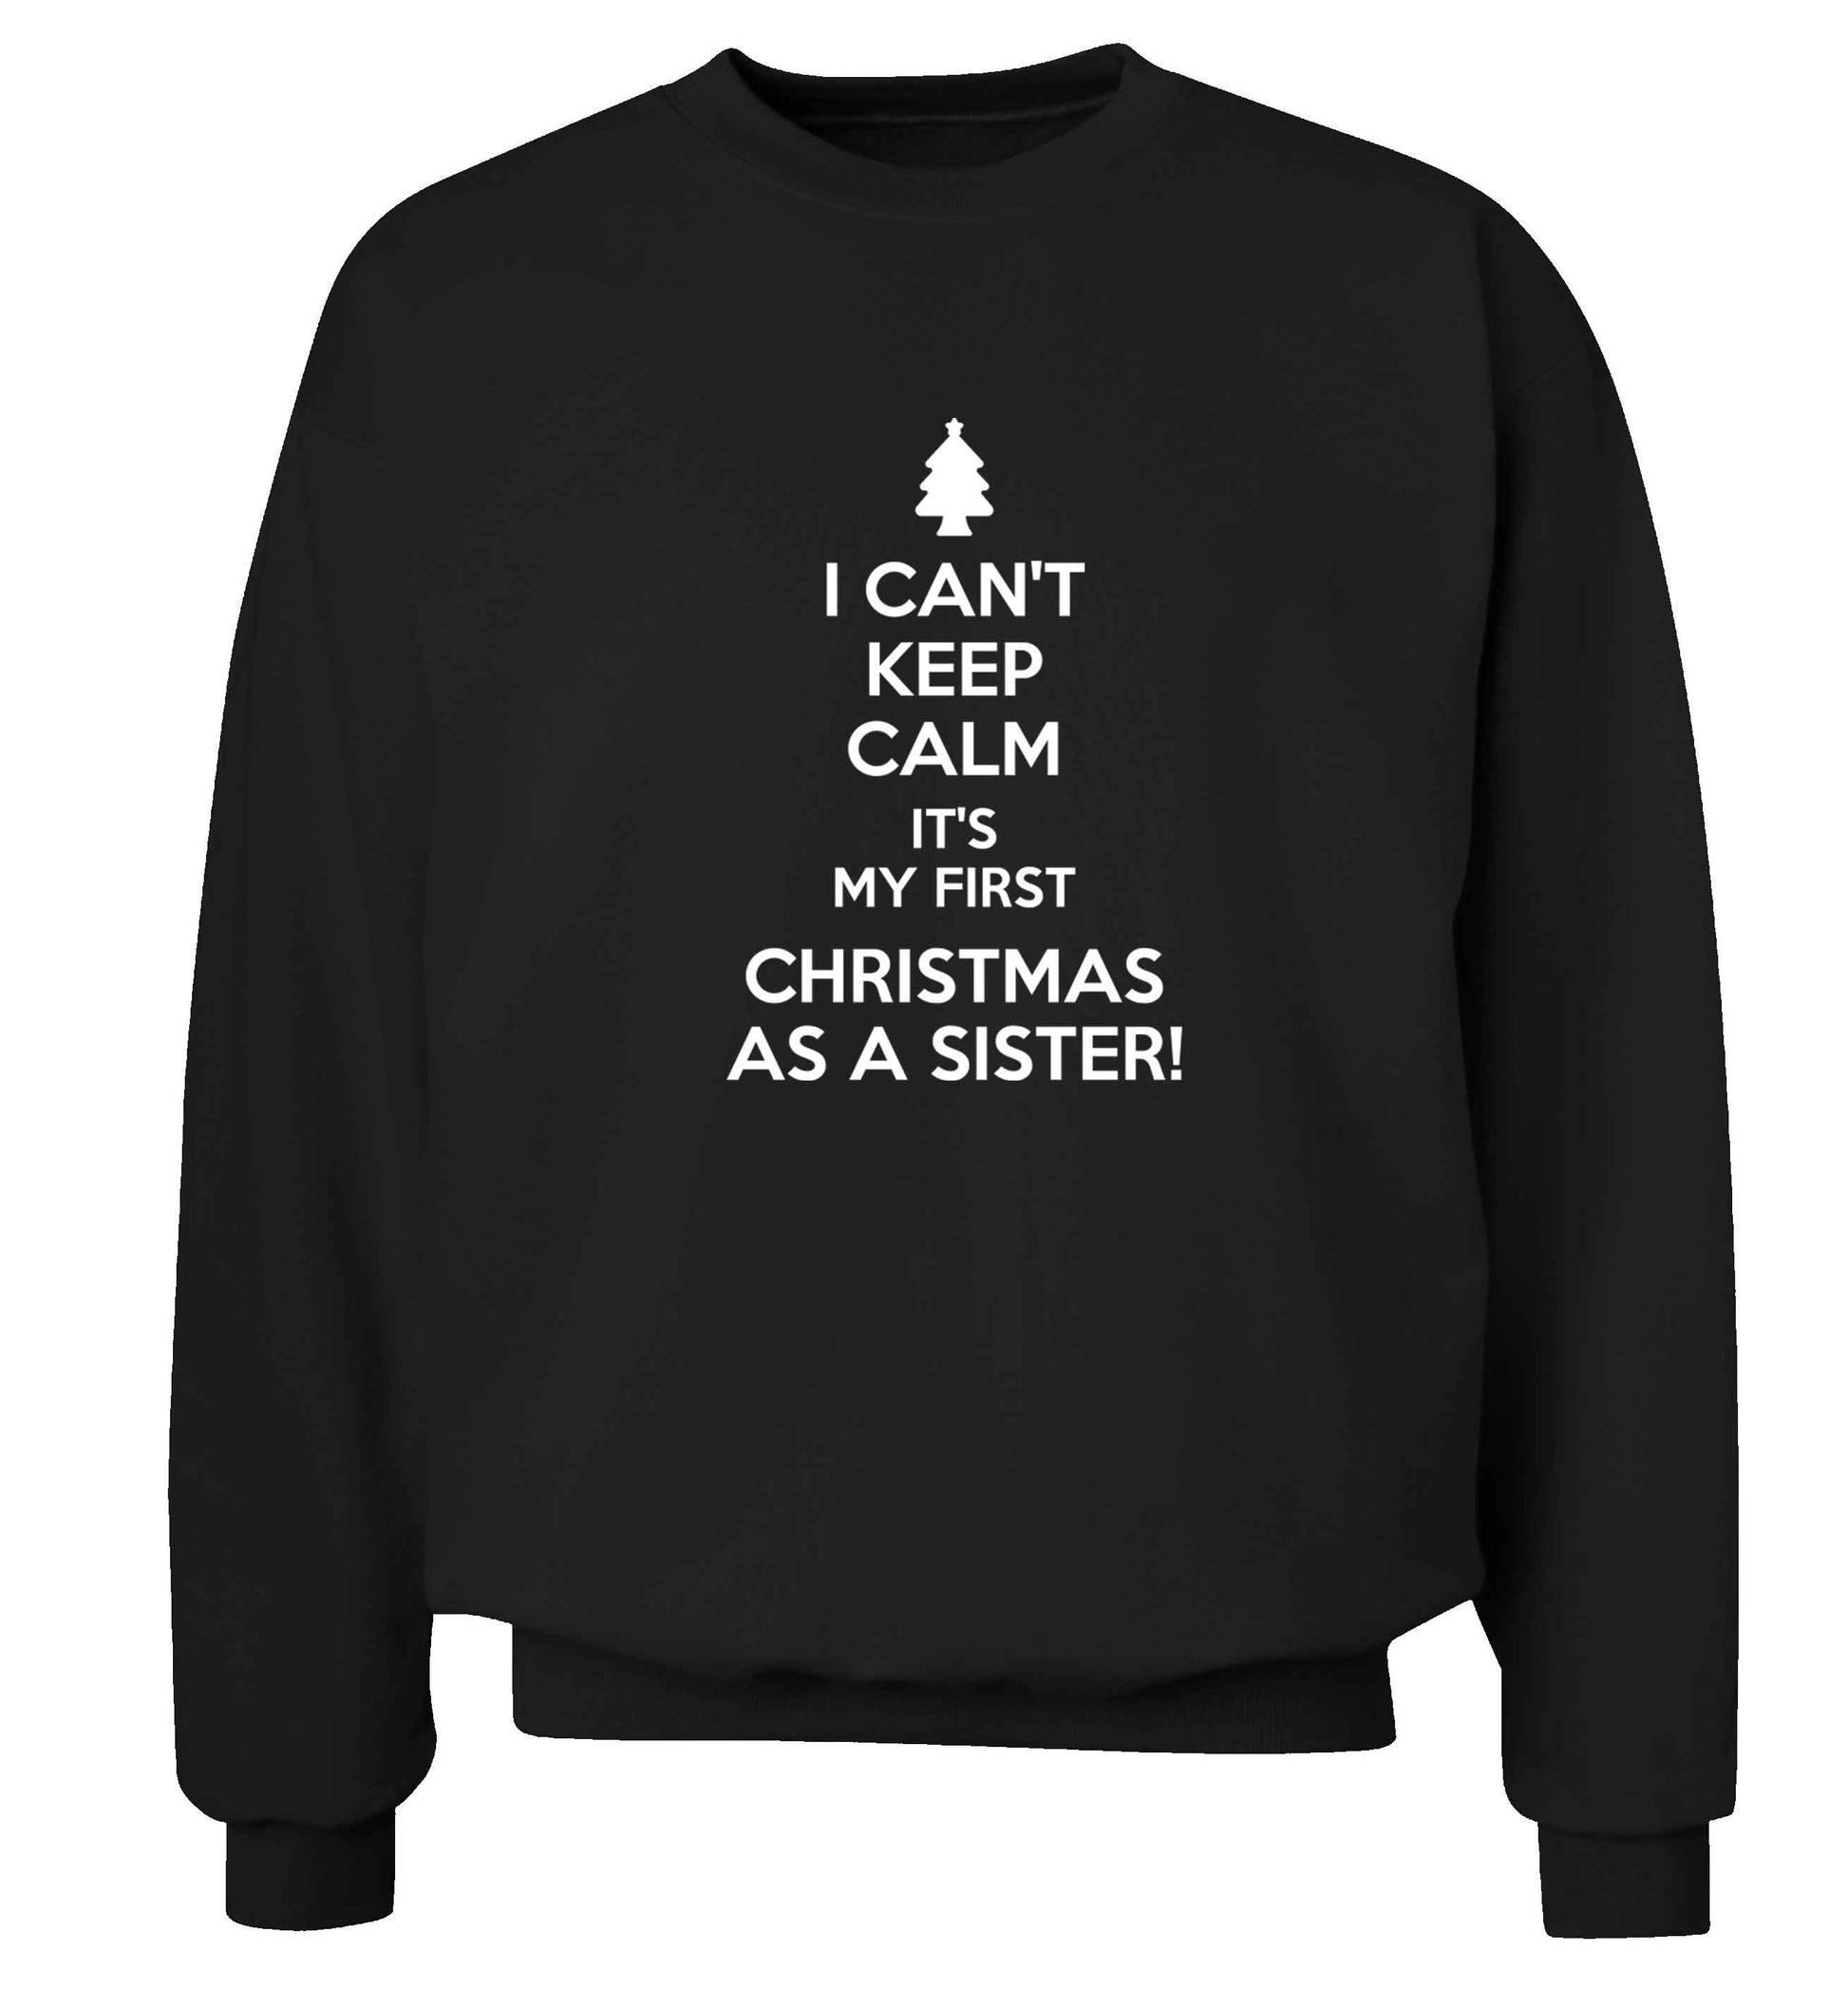 I can't keep calm it's my first Christmas as a sister! Adult's unisex black Sweater 2XL